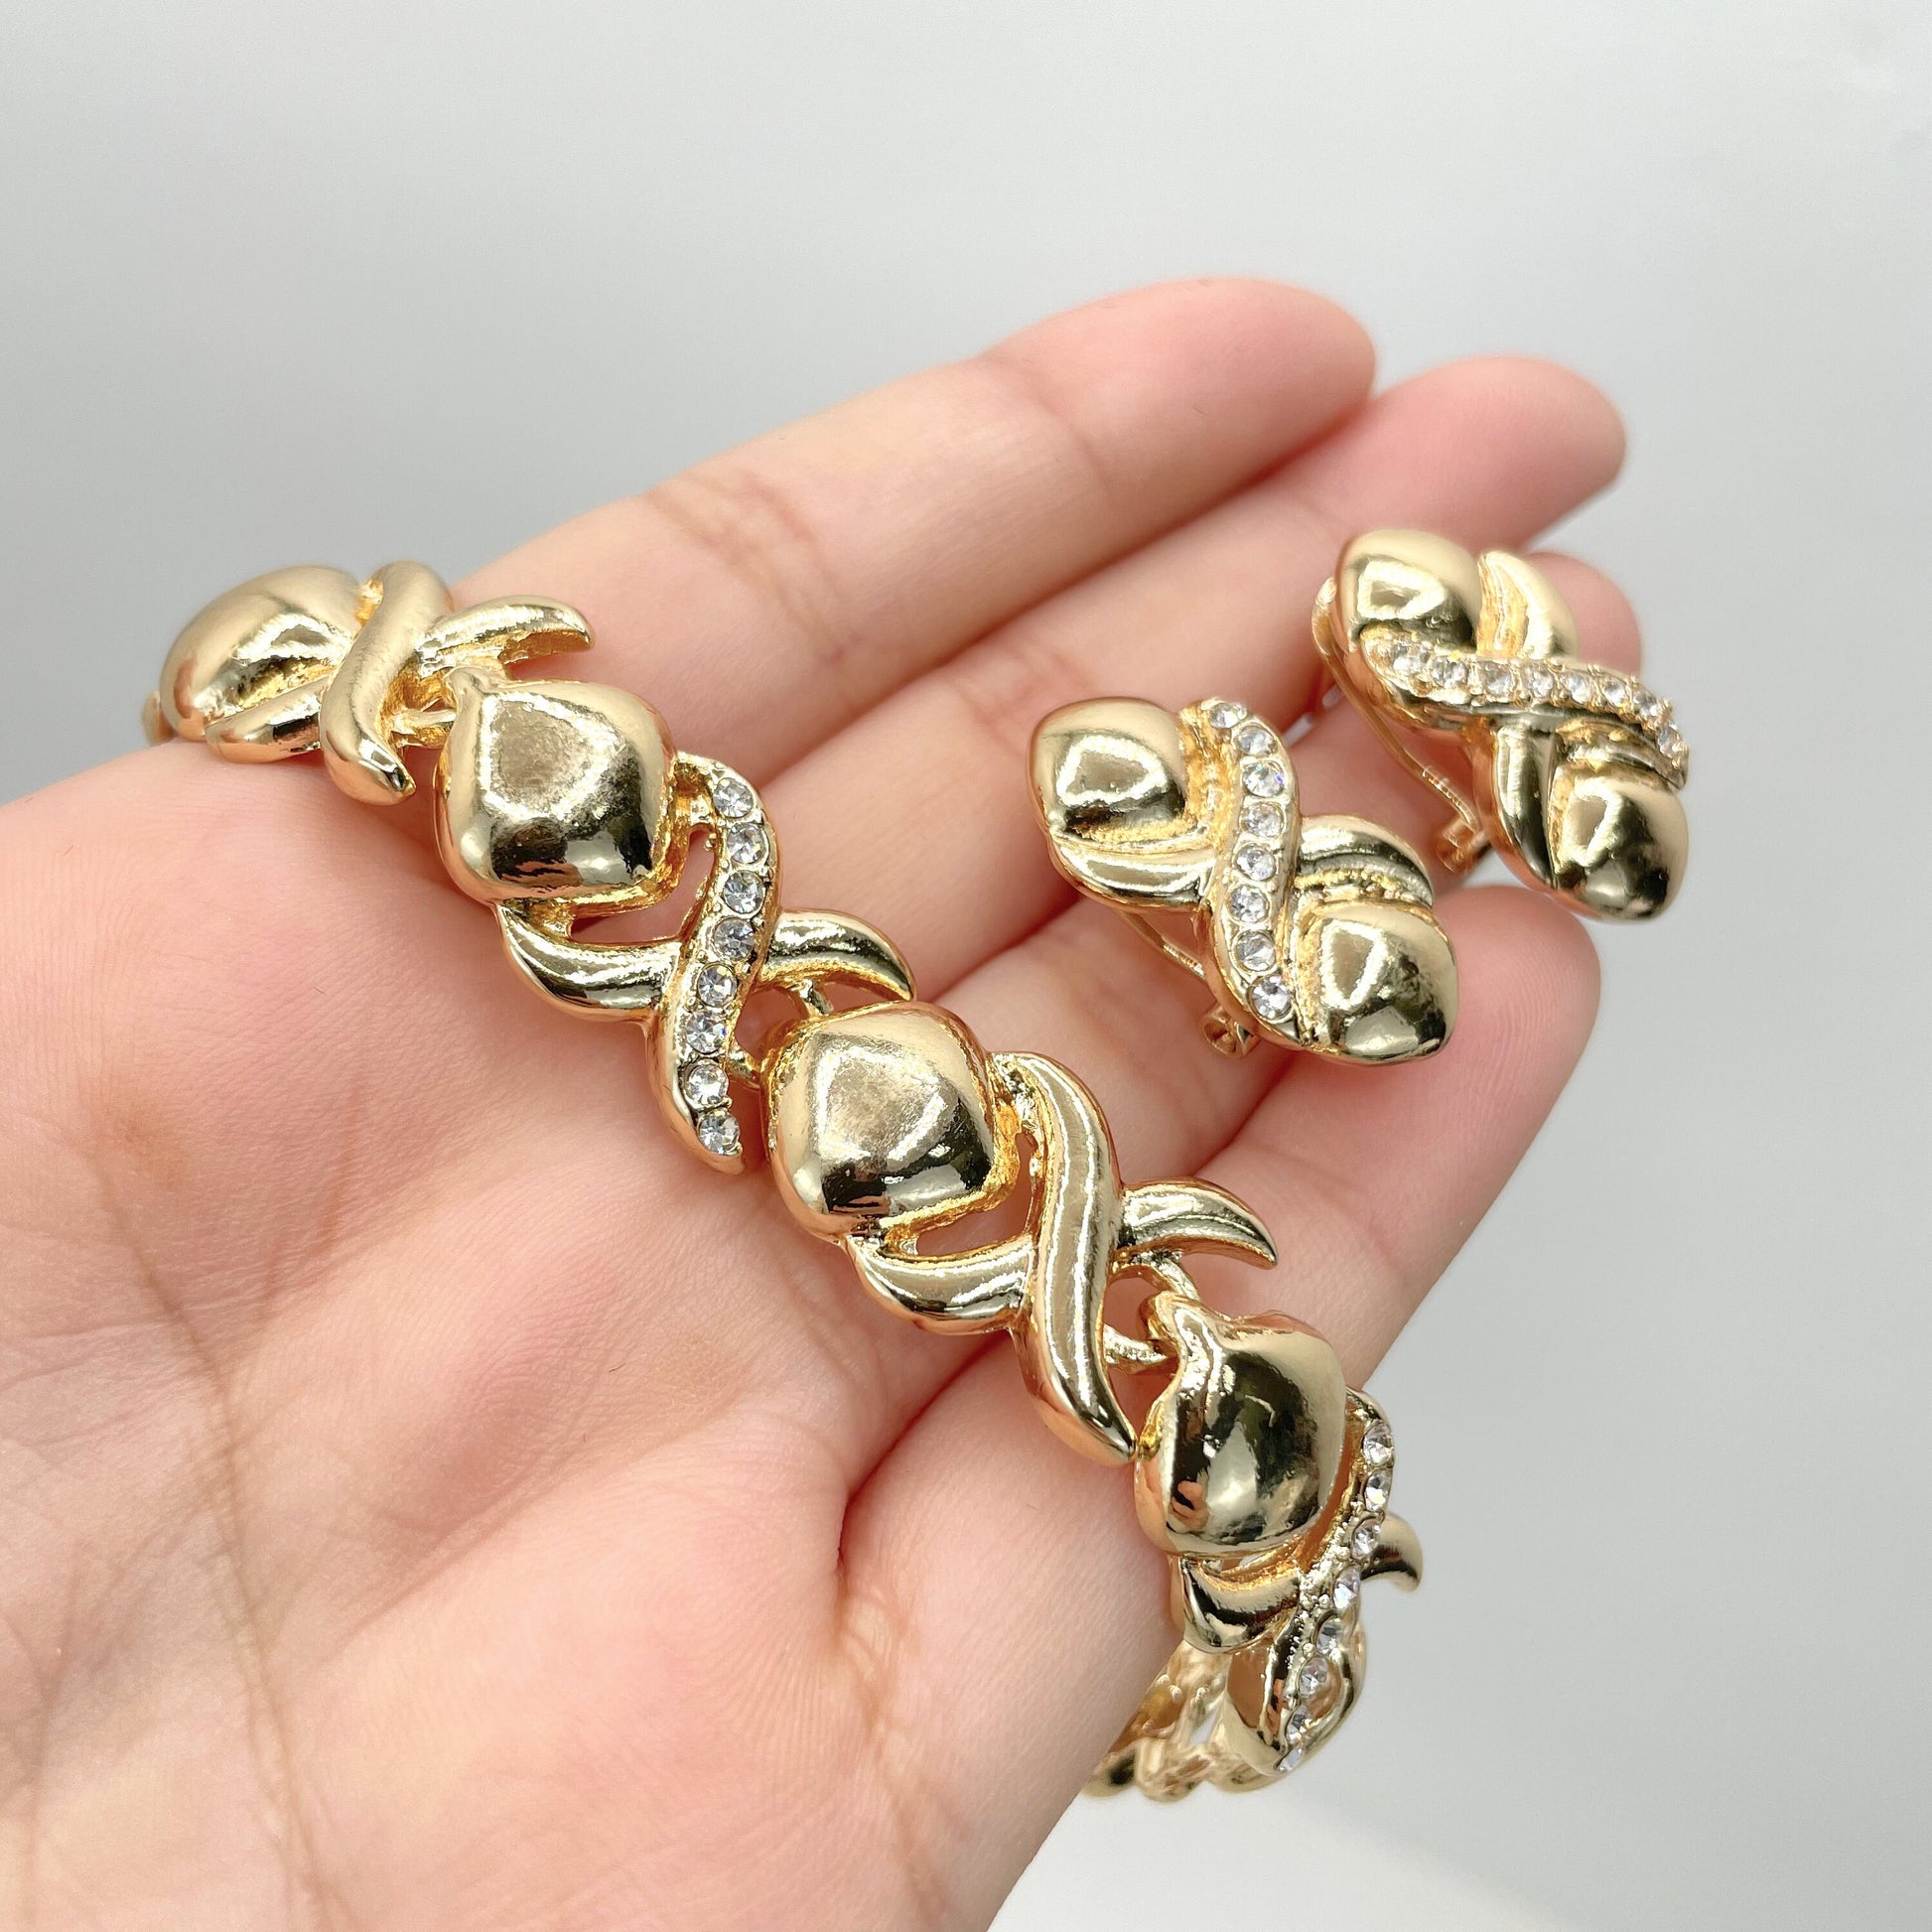 18k Gold Filled 15mm XoXo Hug & Kisses Style Shape Set, Necklace, Bracelet, Earrings and Ring, 04 Pieces, Wholesale Jewelry Supplies